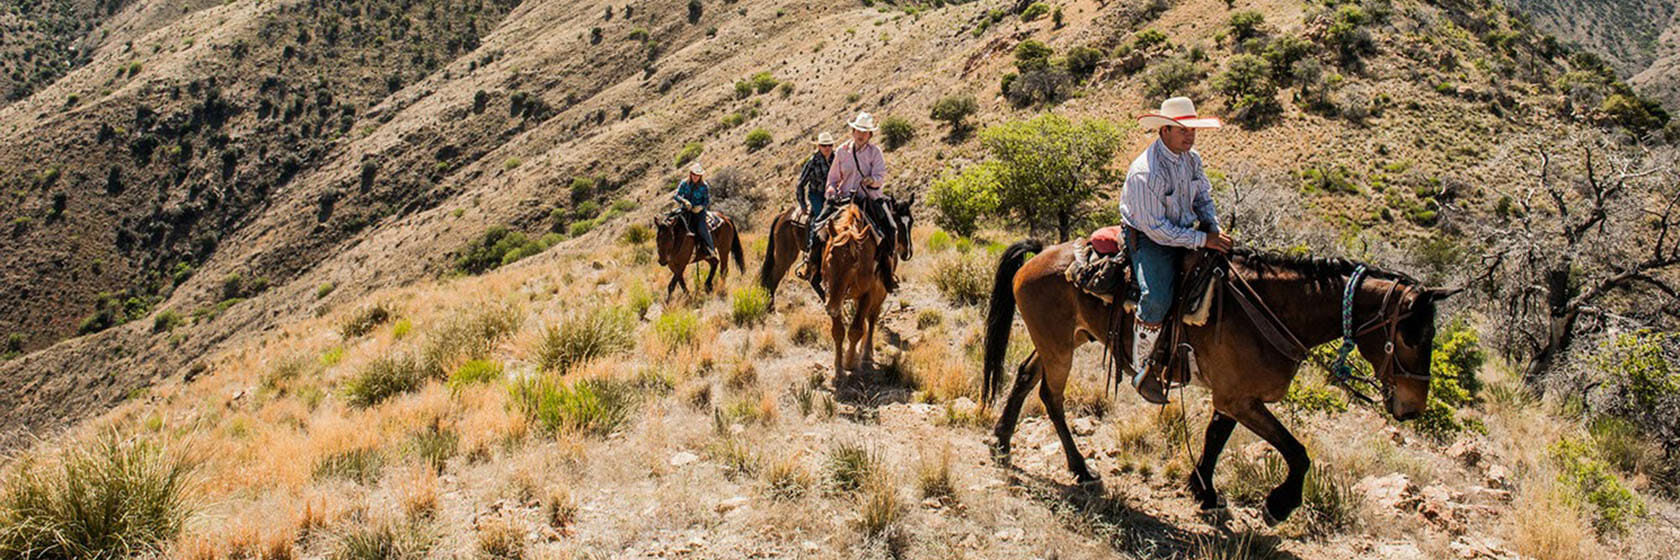 Group of people on a trail ride